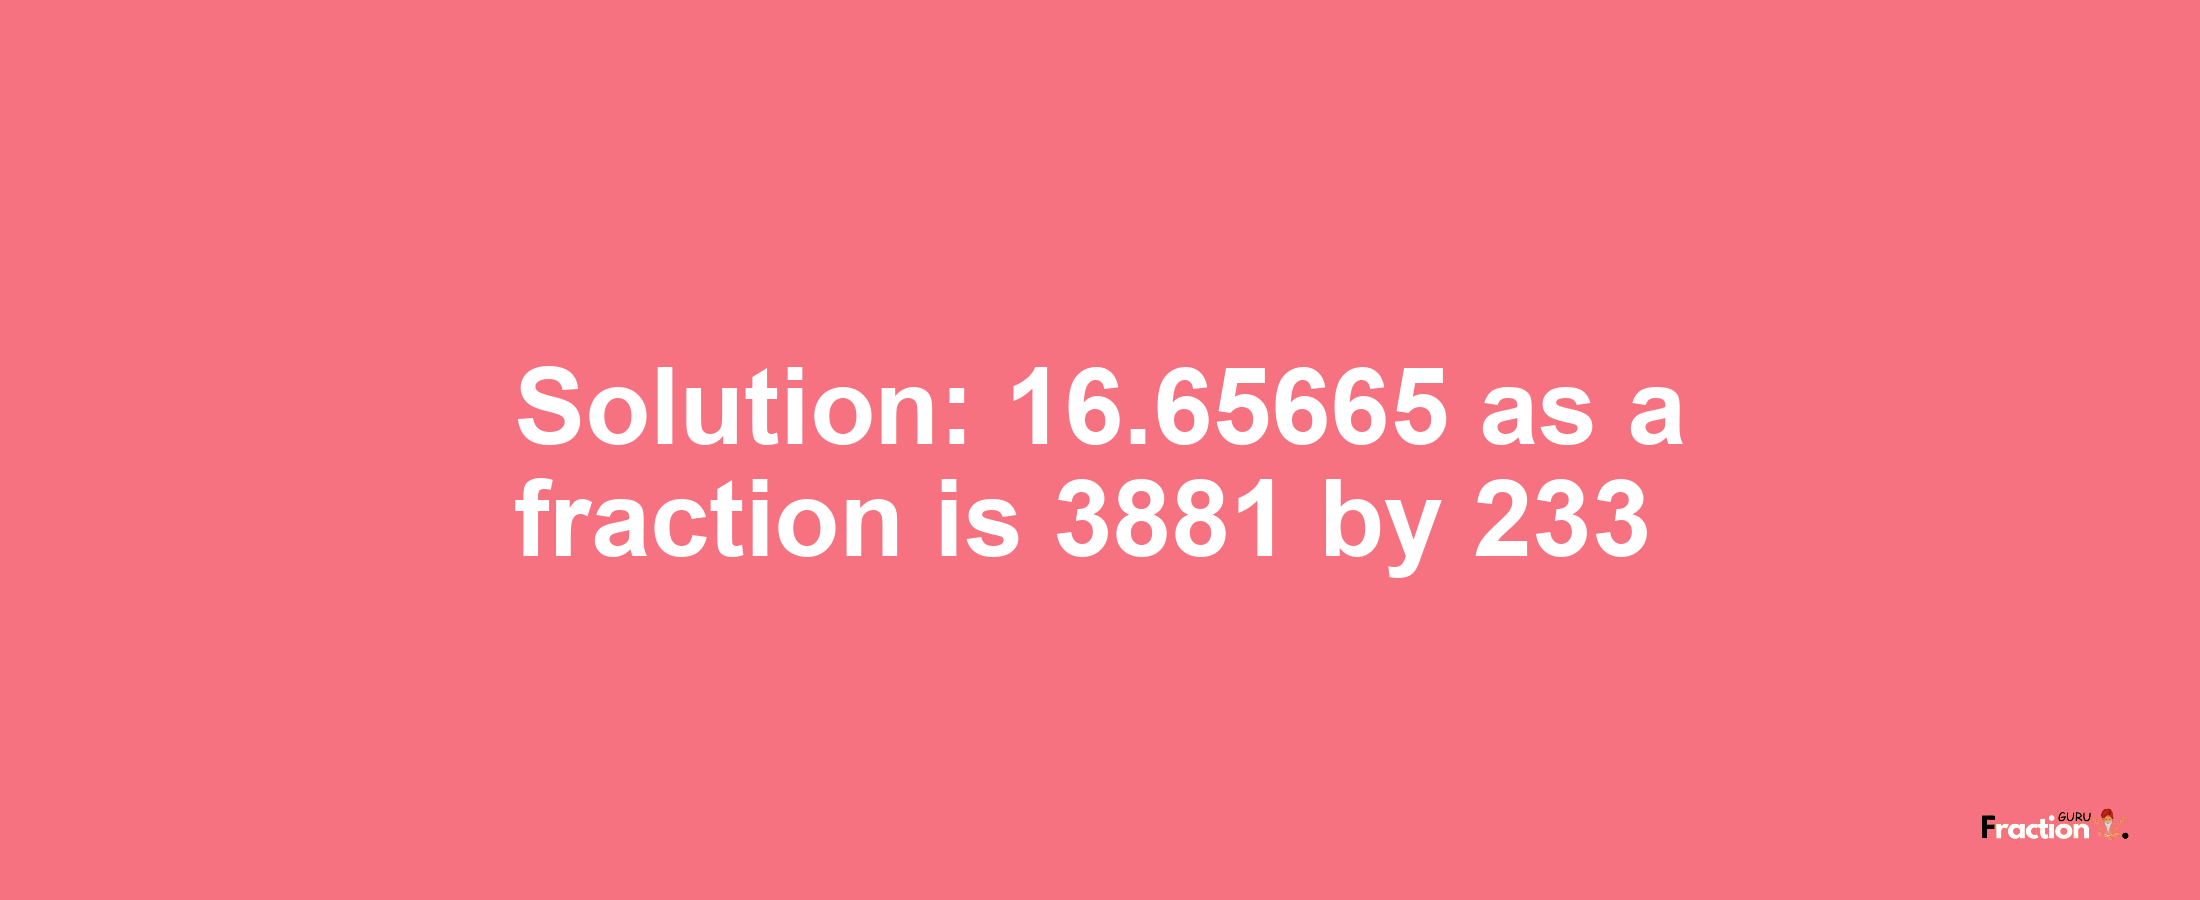 Solution:16.65665 as a fraction is 3881/233